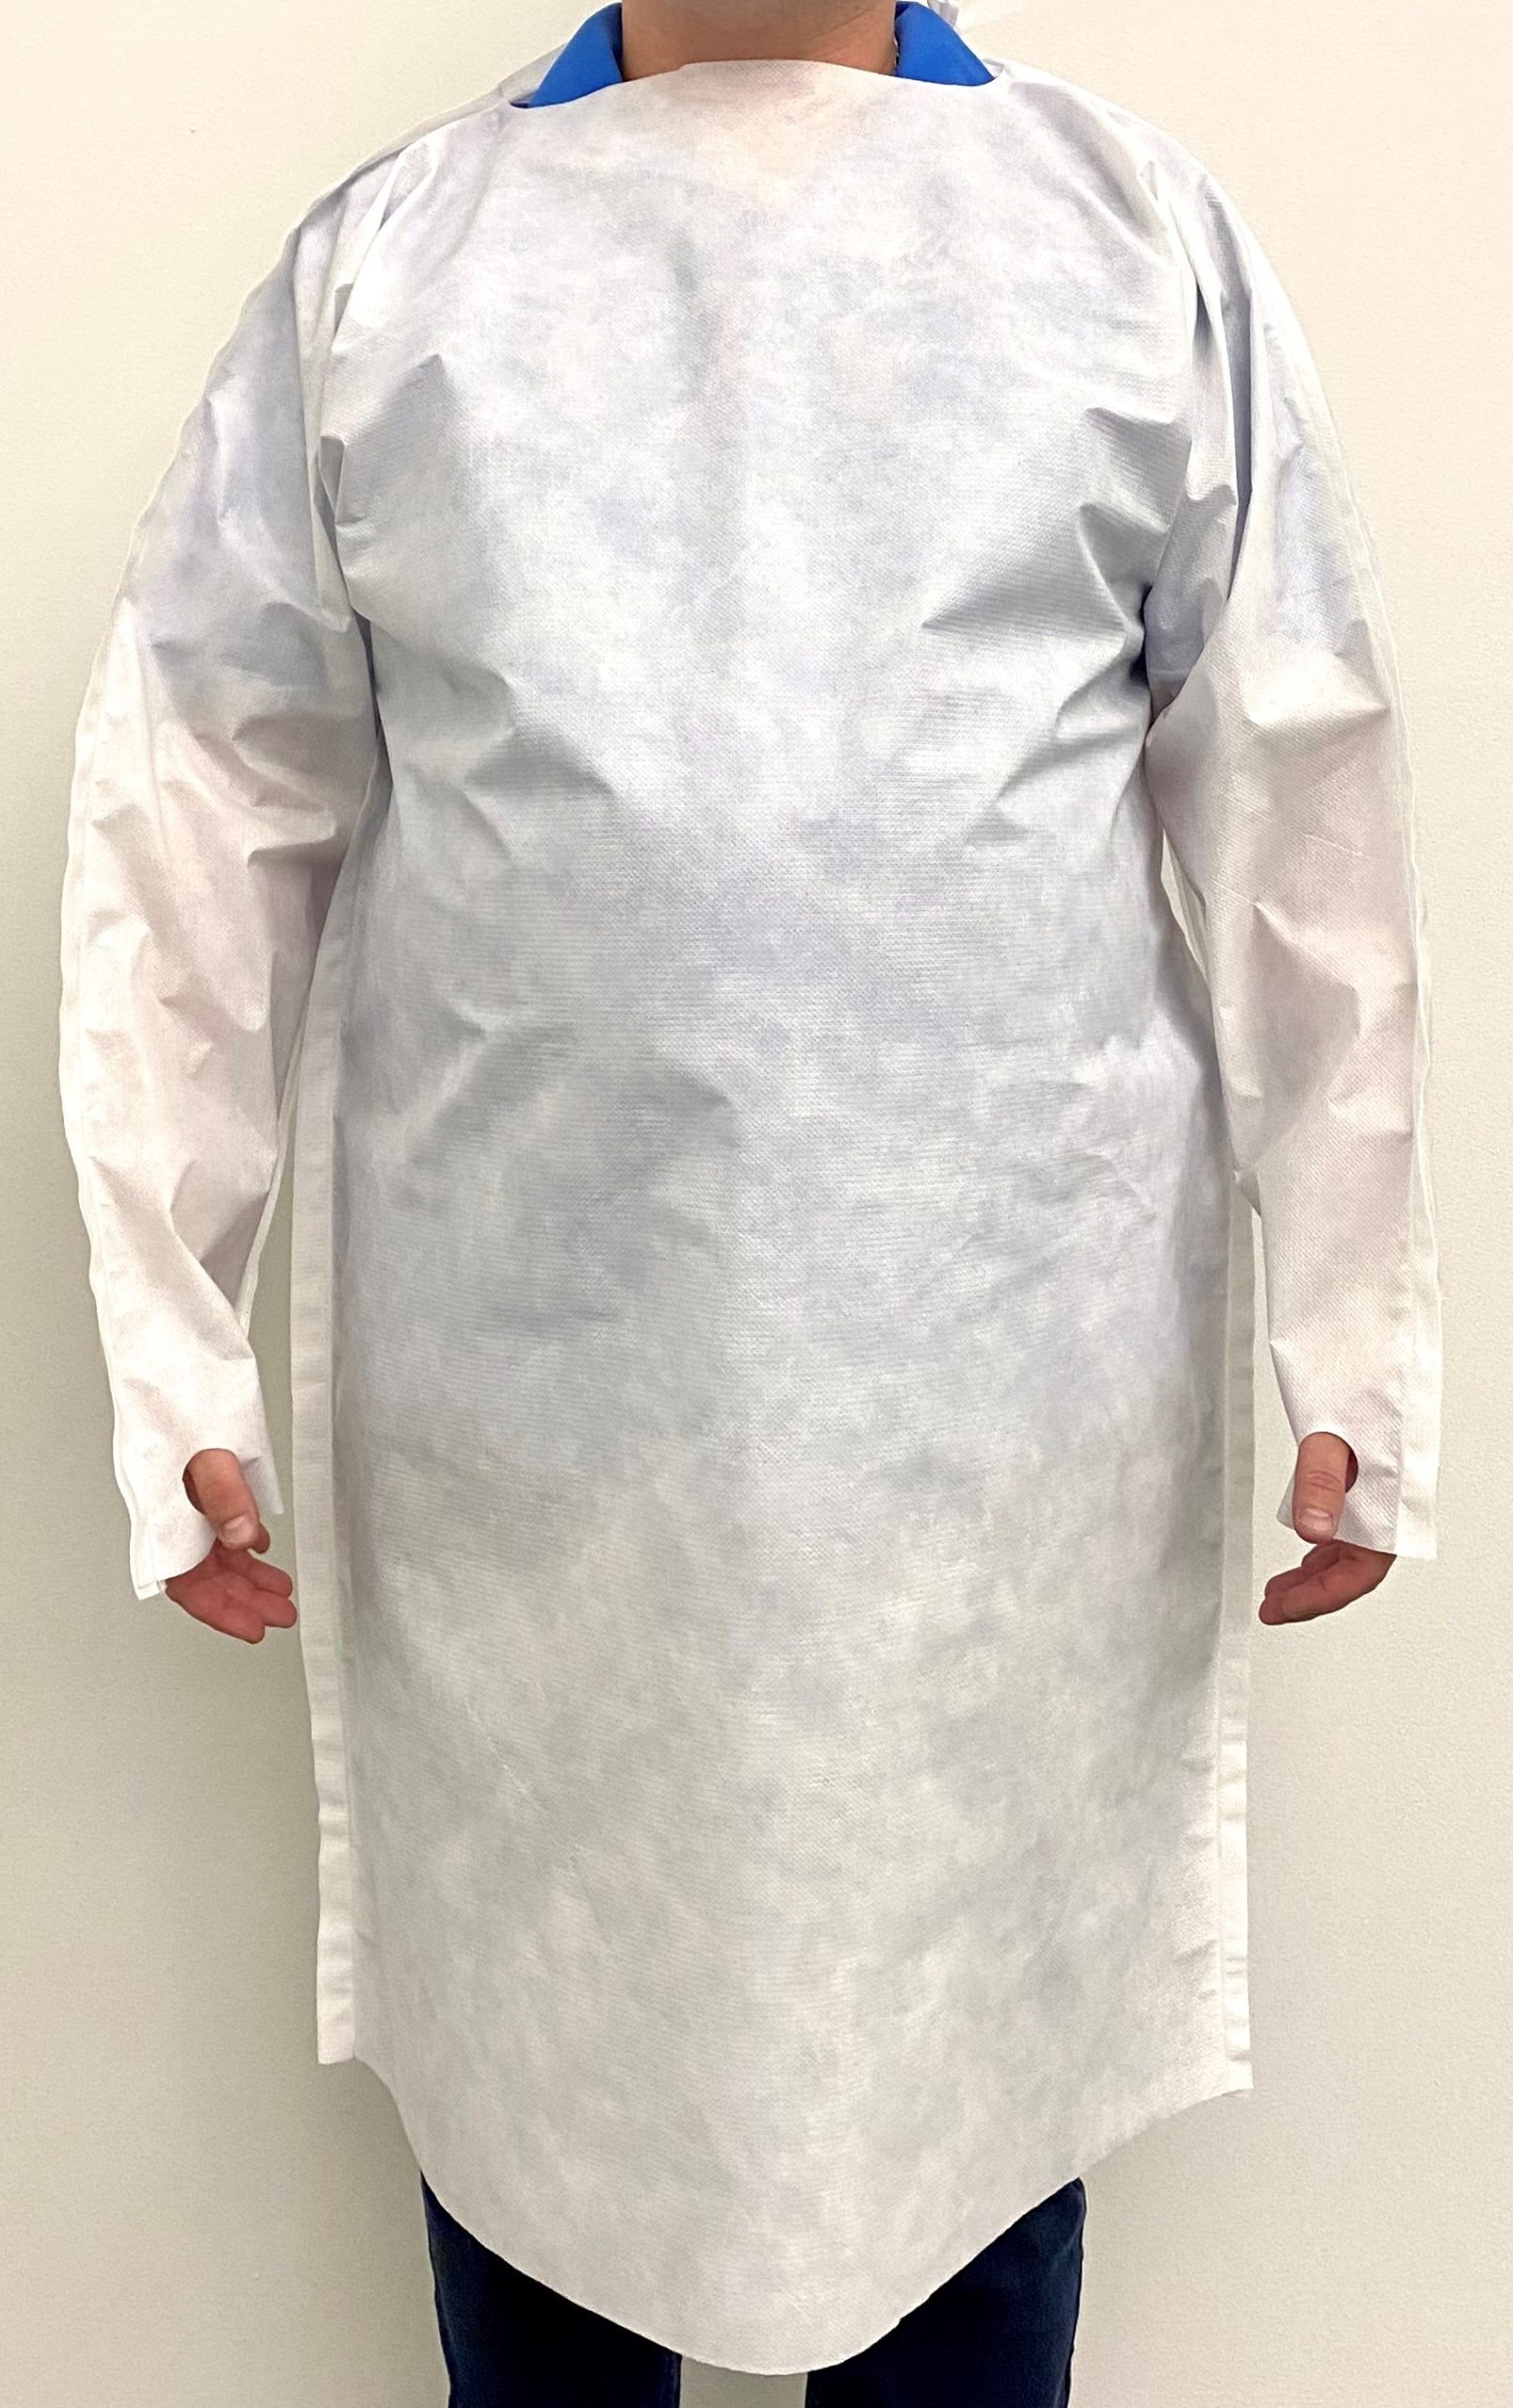 SGL202Z Shawmut Protex™ Single-Use AAMI Level 2 Over-the-Head Style Spunbond Polypropylene White Isolation Gowns with Thumb Holes